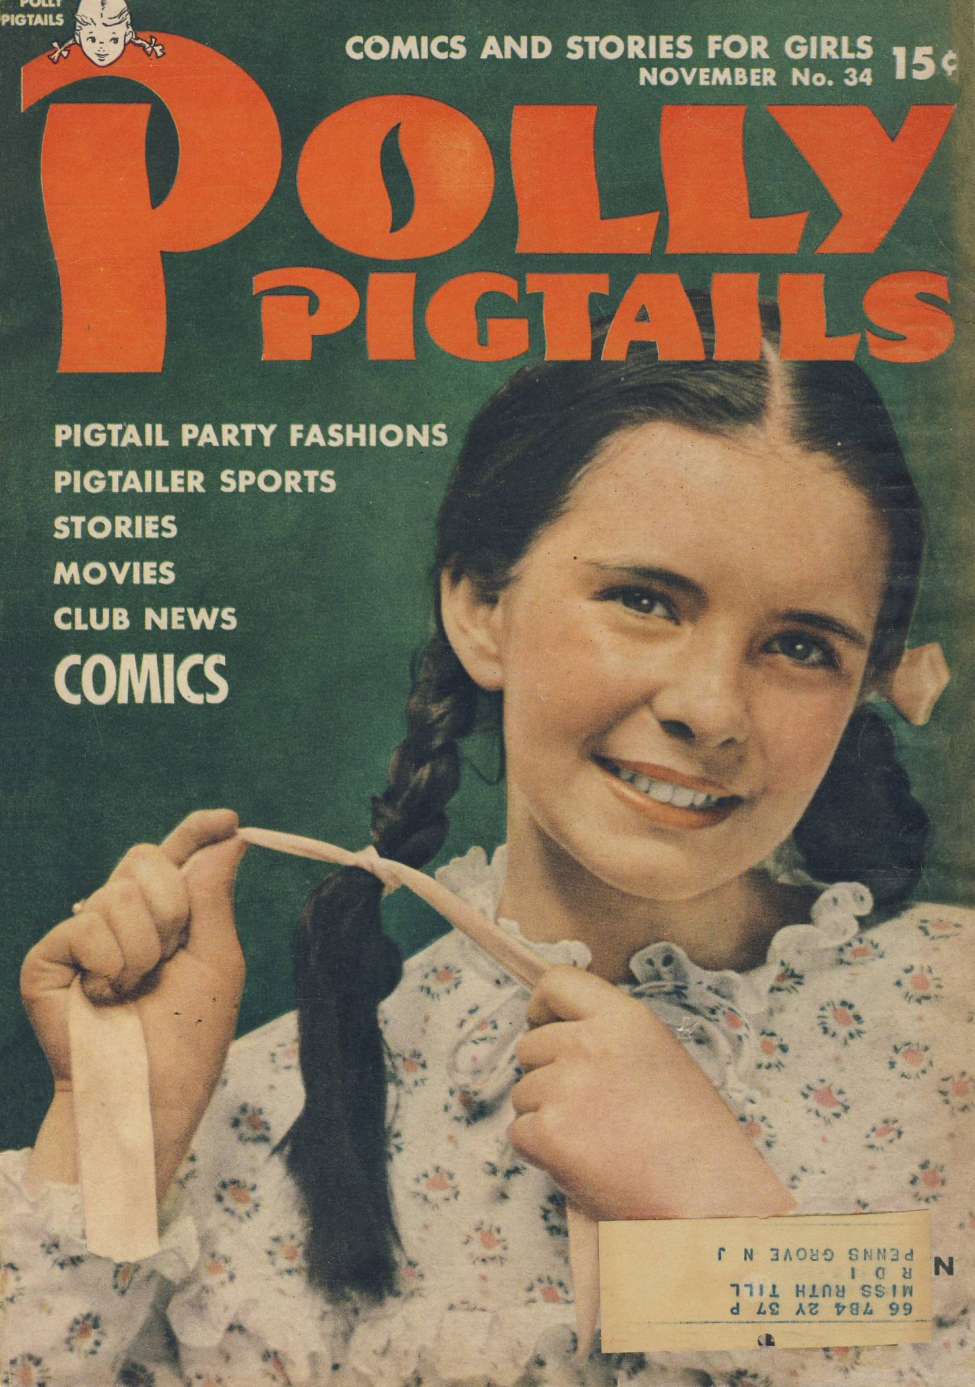 Book Cover For Polly Pigtails 34 - Version 1